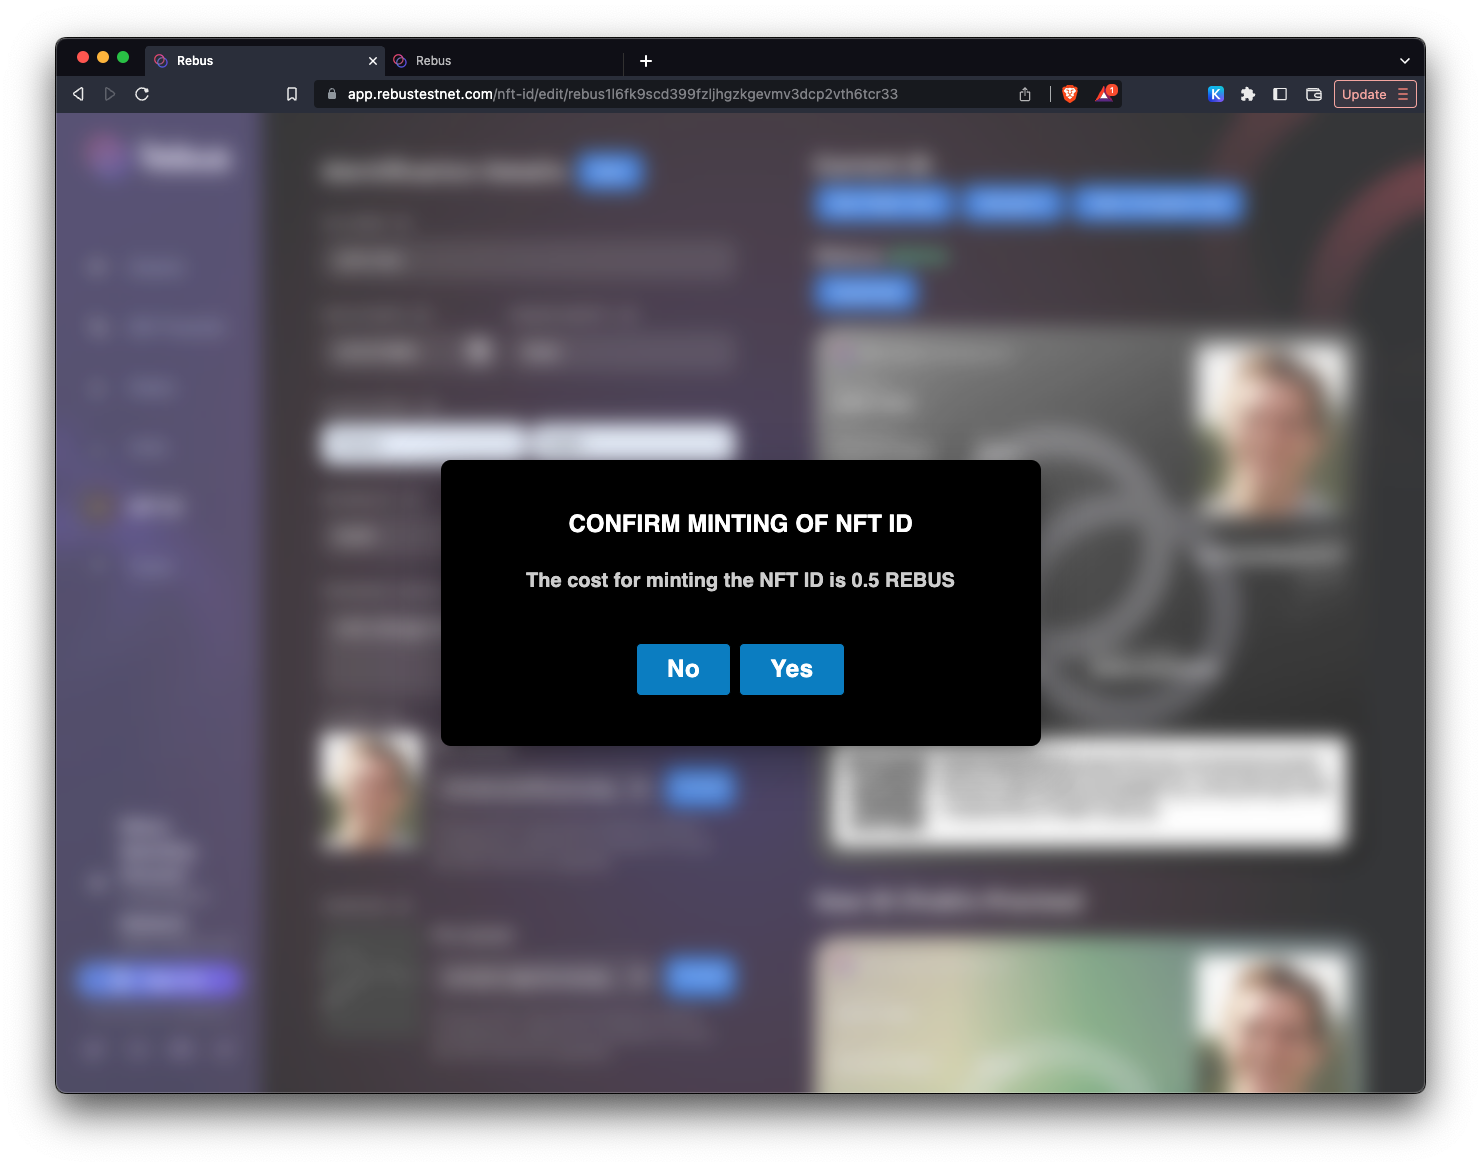 Confirm the update on the confirmation modal